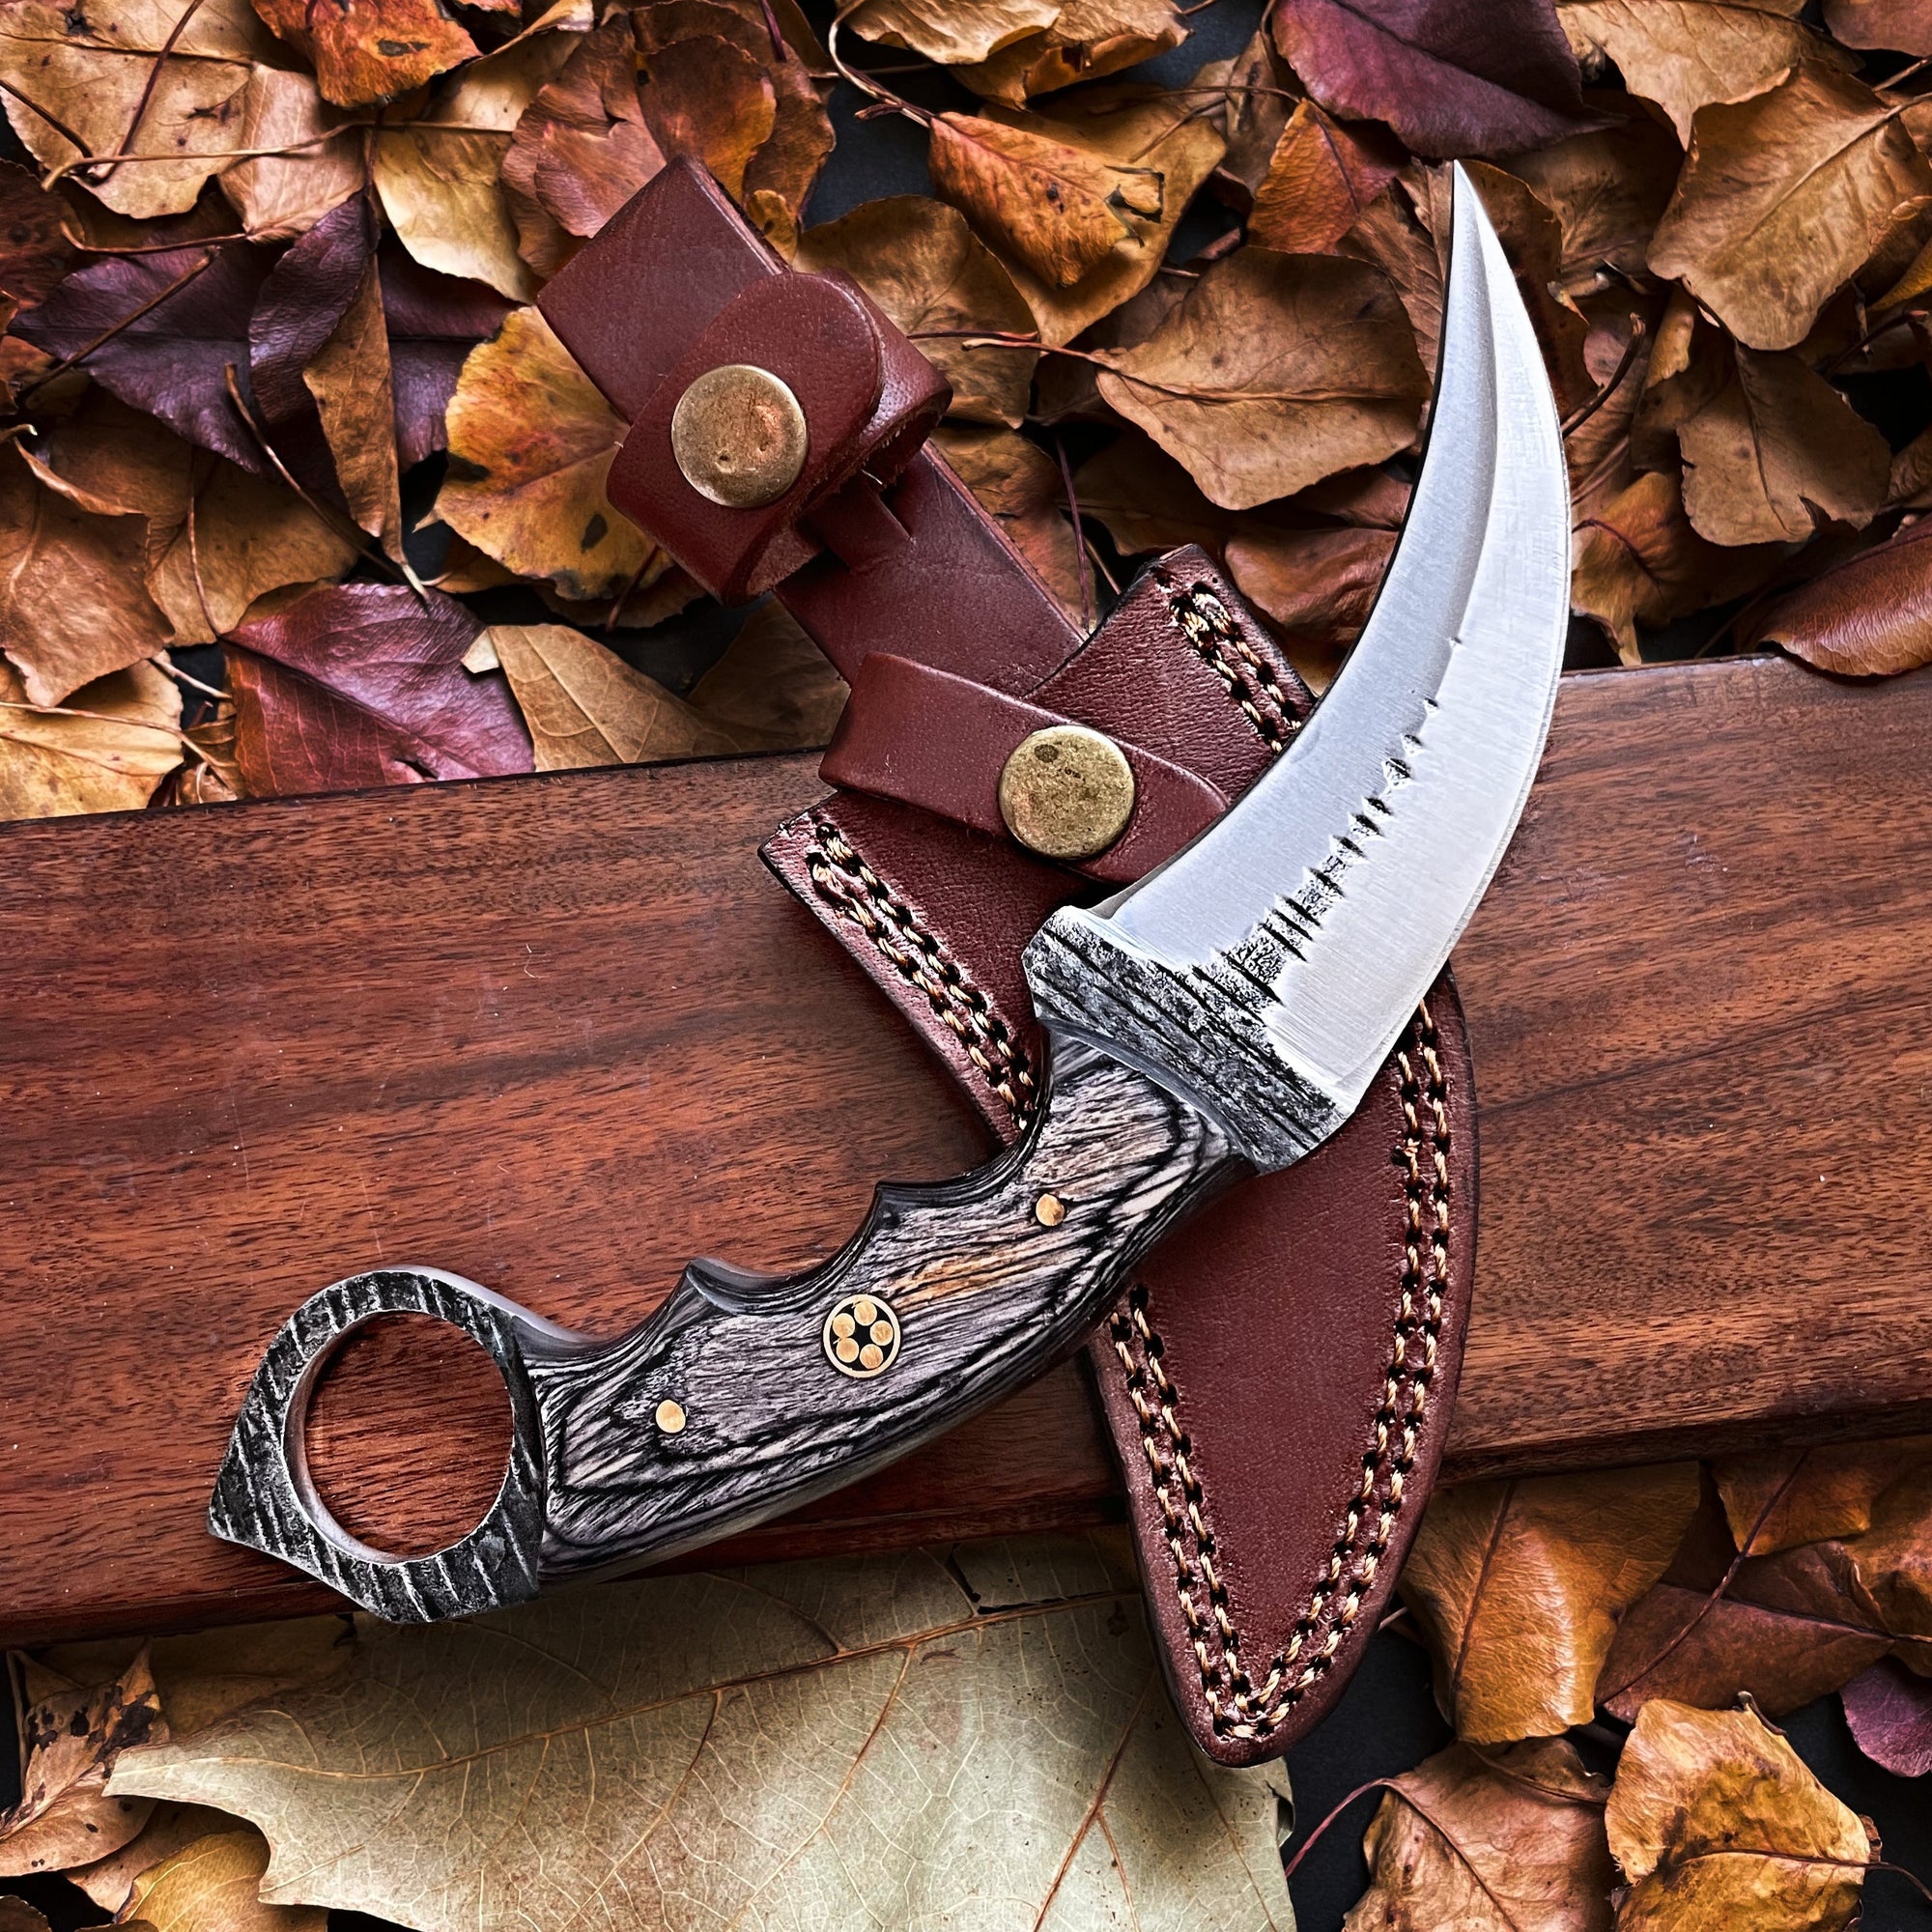 28 Unique Damascus Knives in 2023 - Groovy Guy Gifts